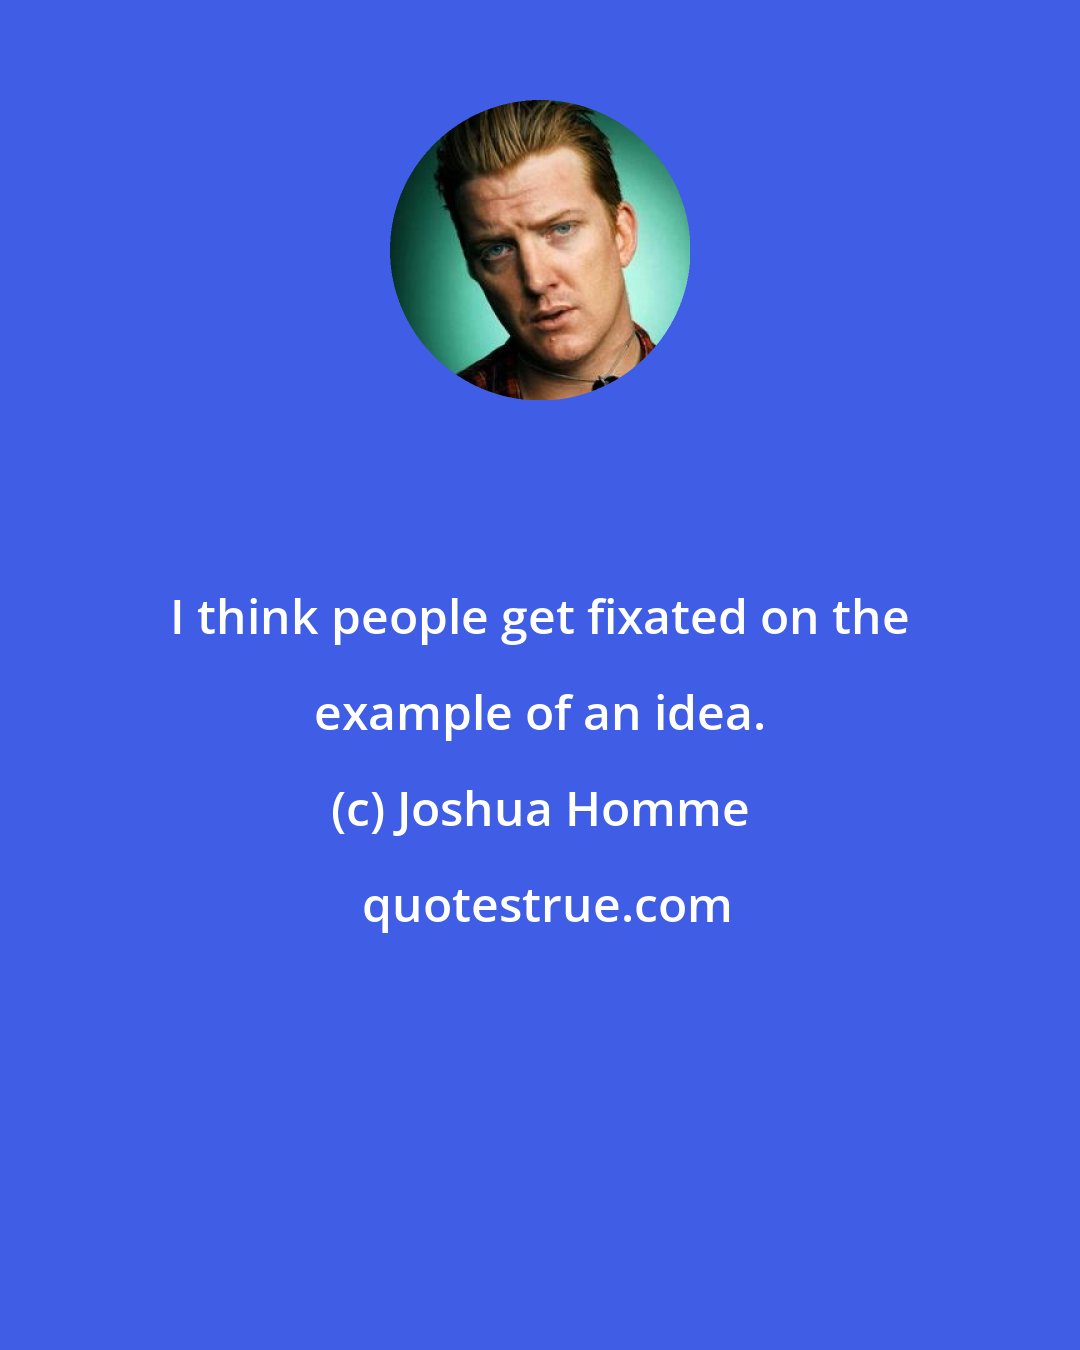 Joshua Homme: I think people get fixated on the example of an idea.